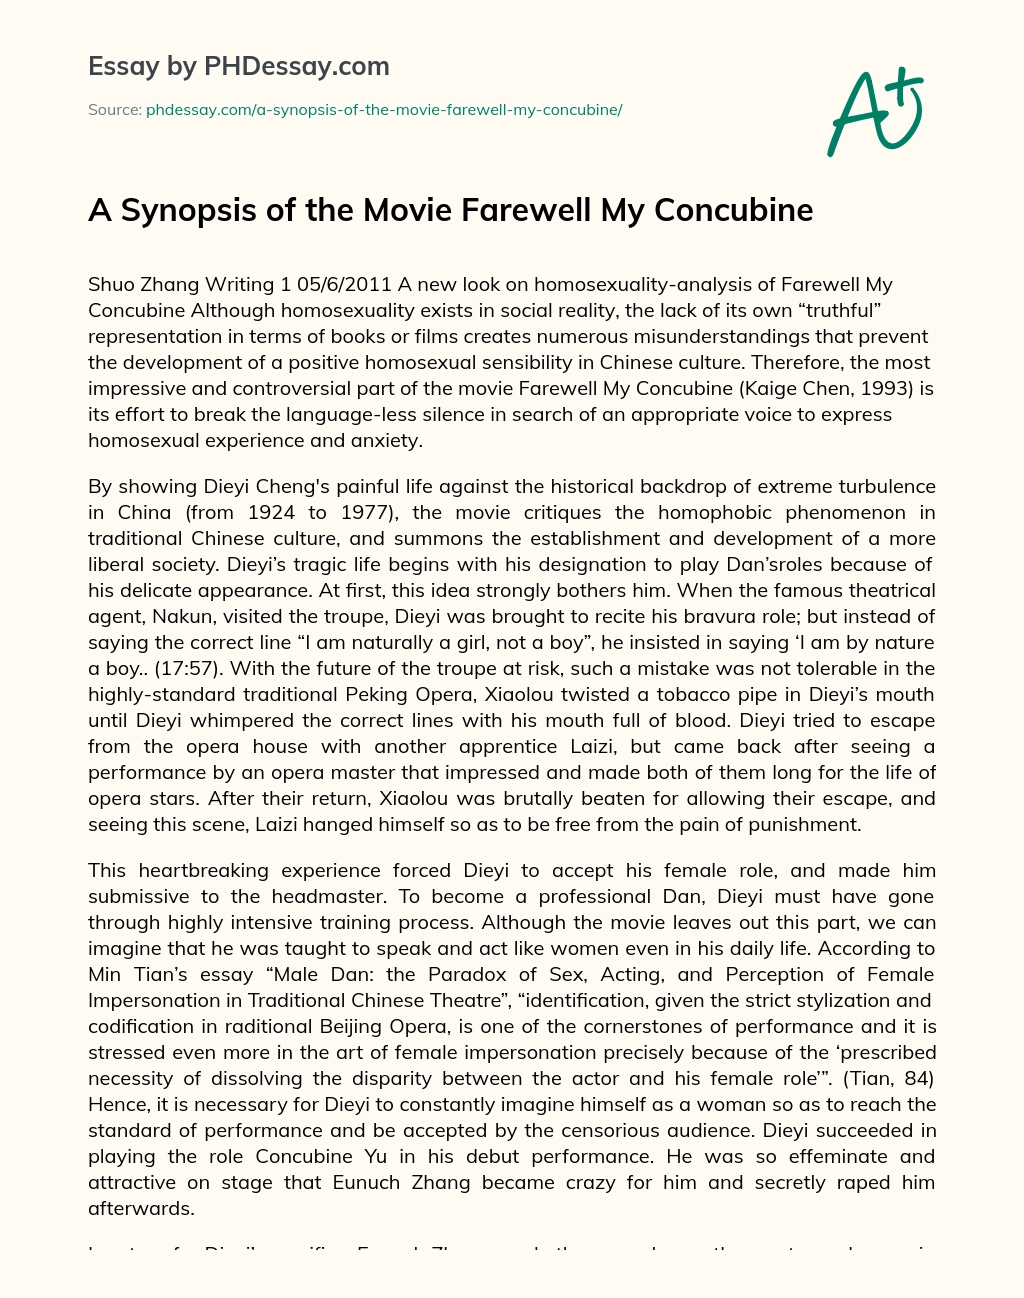 A Synopsis of the Movie Farewell My Concubine essay